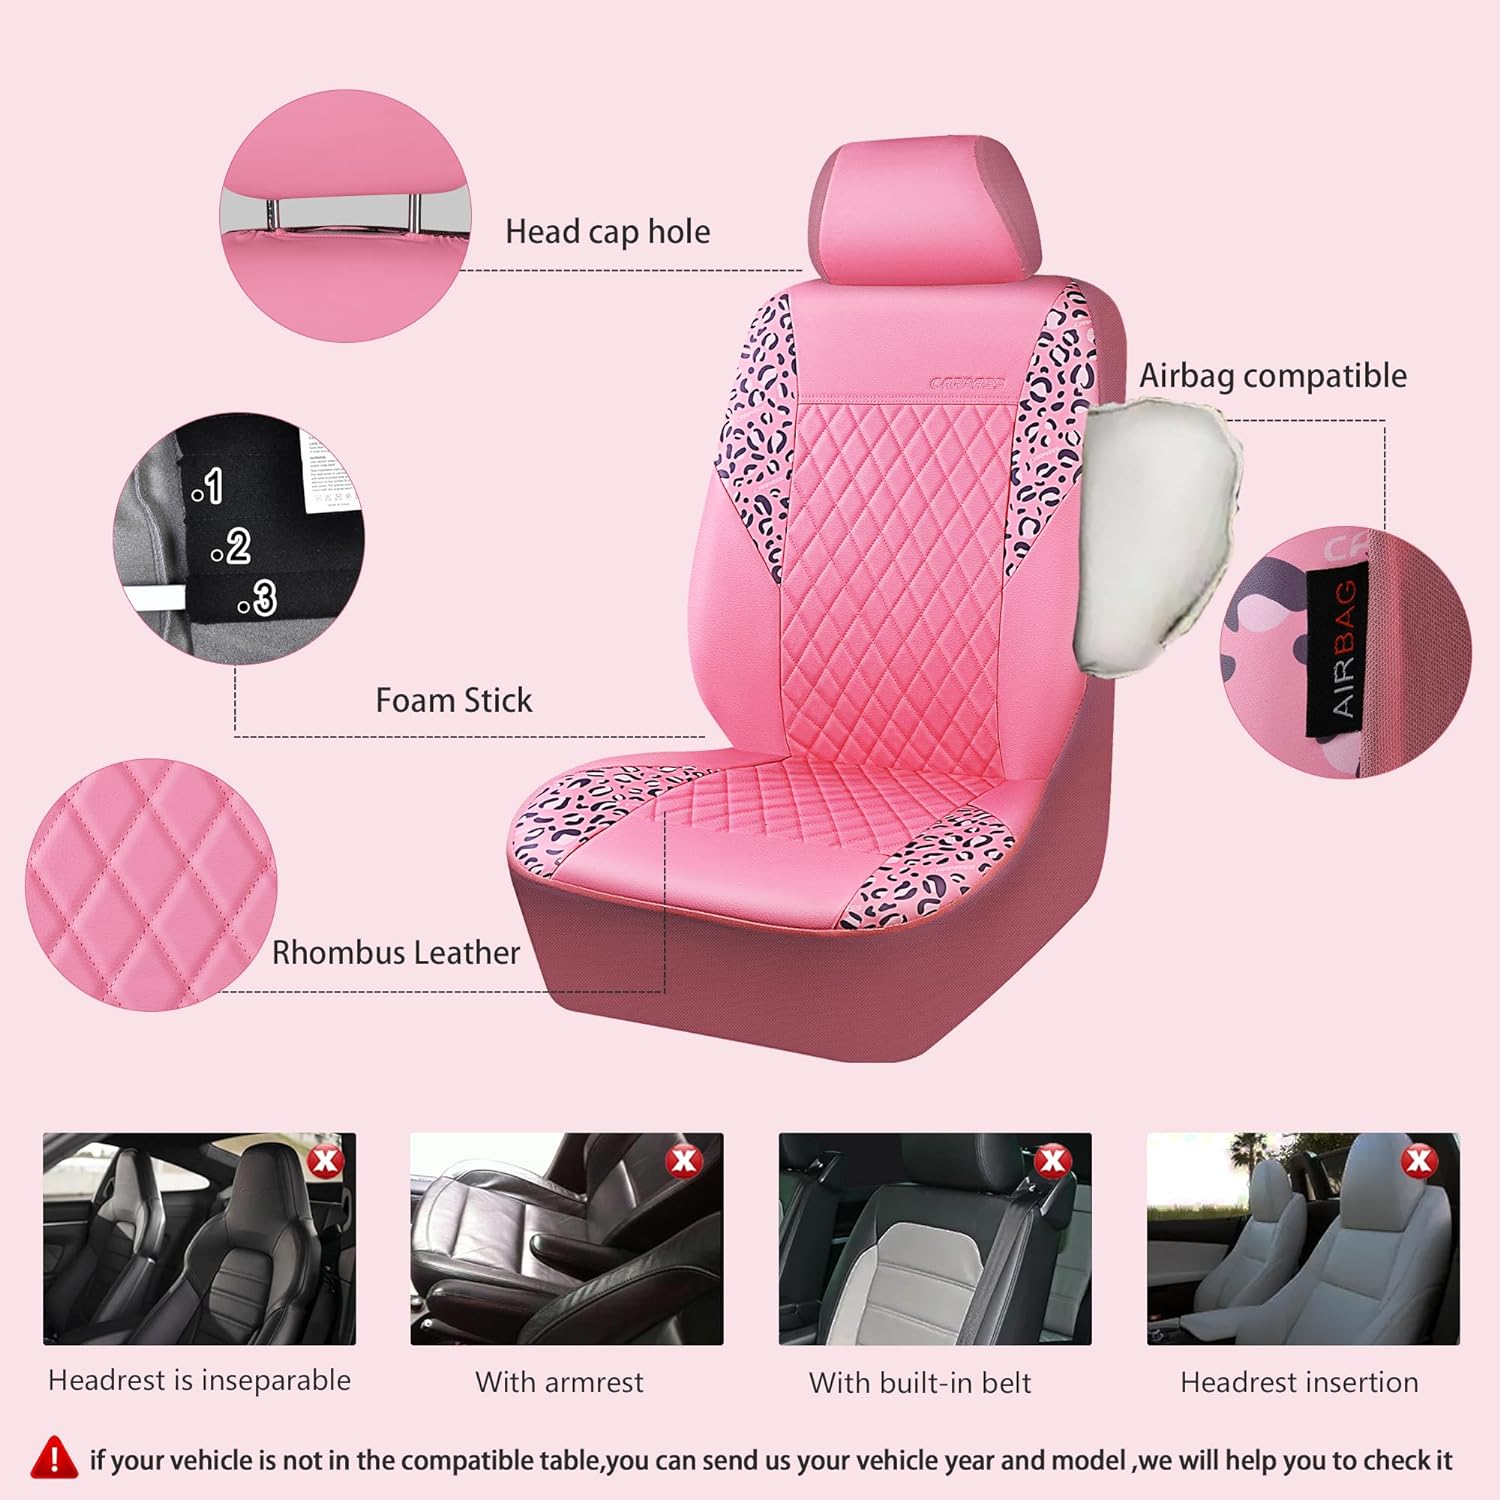 CAR PASS Leather Leopard Two Front Seat Cover & Pink Car Mats, Car Seat Cover for Cute Women Girly,5mm Composite Sponge Inside,Airbag Compatible Fit for Most Sedan,SUV,Truck (Pink)